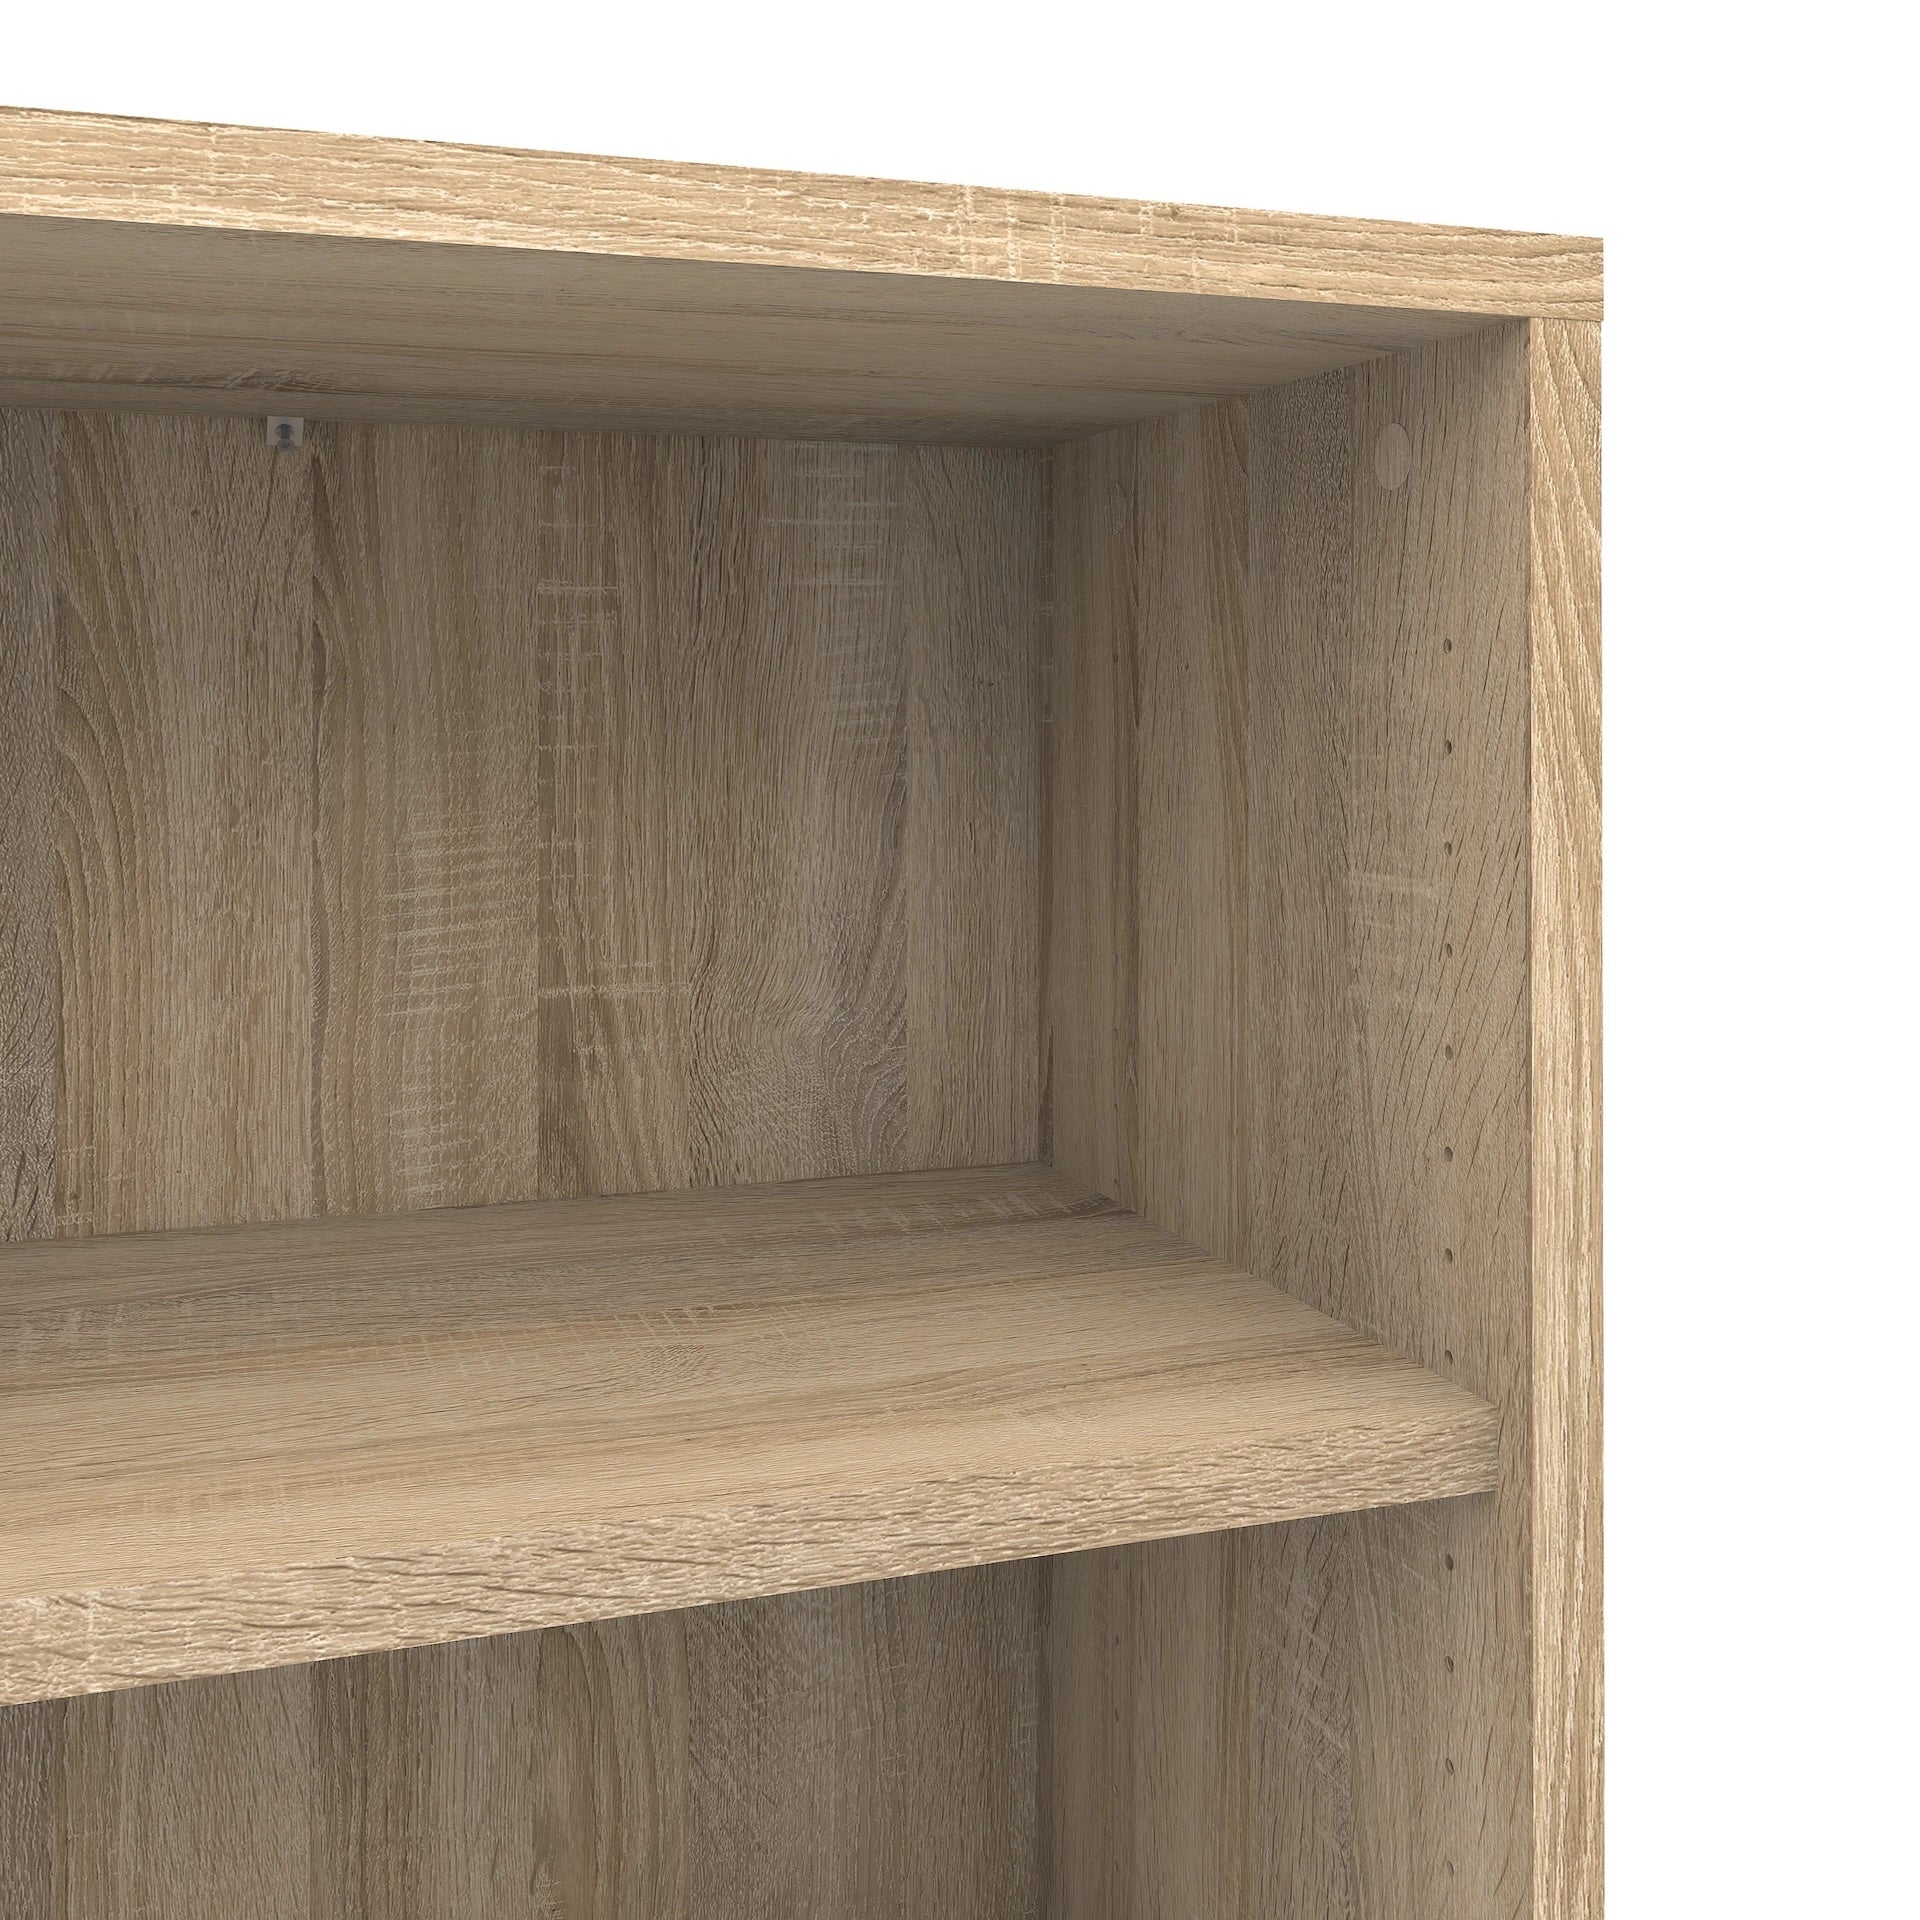 Furniture To Go Prima Bookcase 2 Shelves with 2 Drawers & 2 Doors in Oak